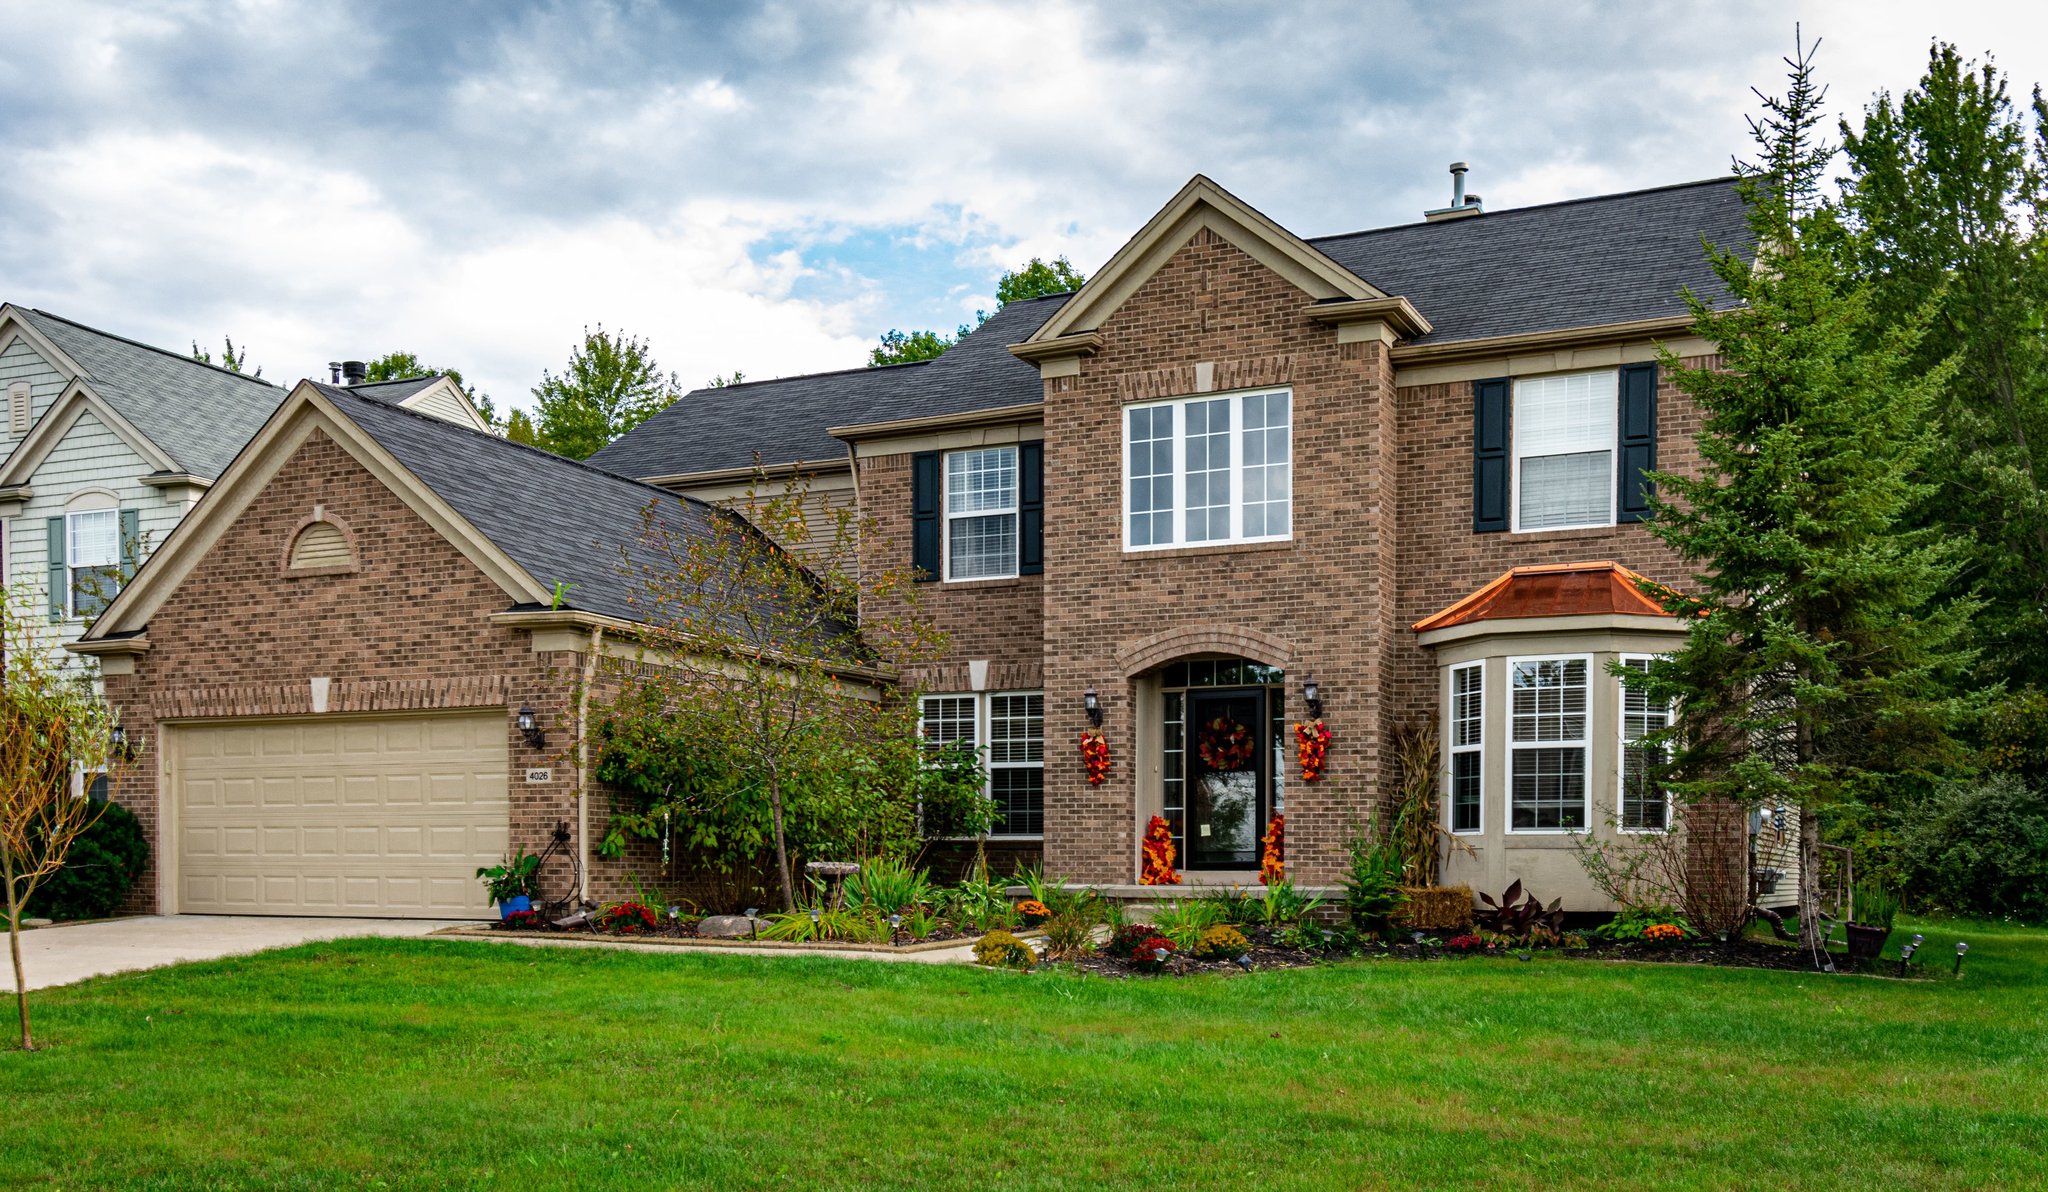 Large Family Homes In Howell Michigan